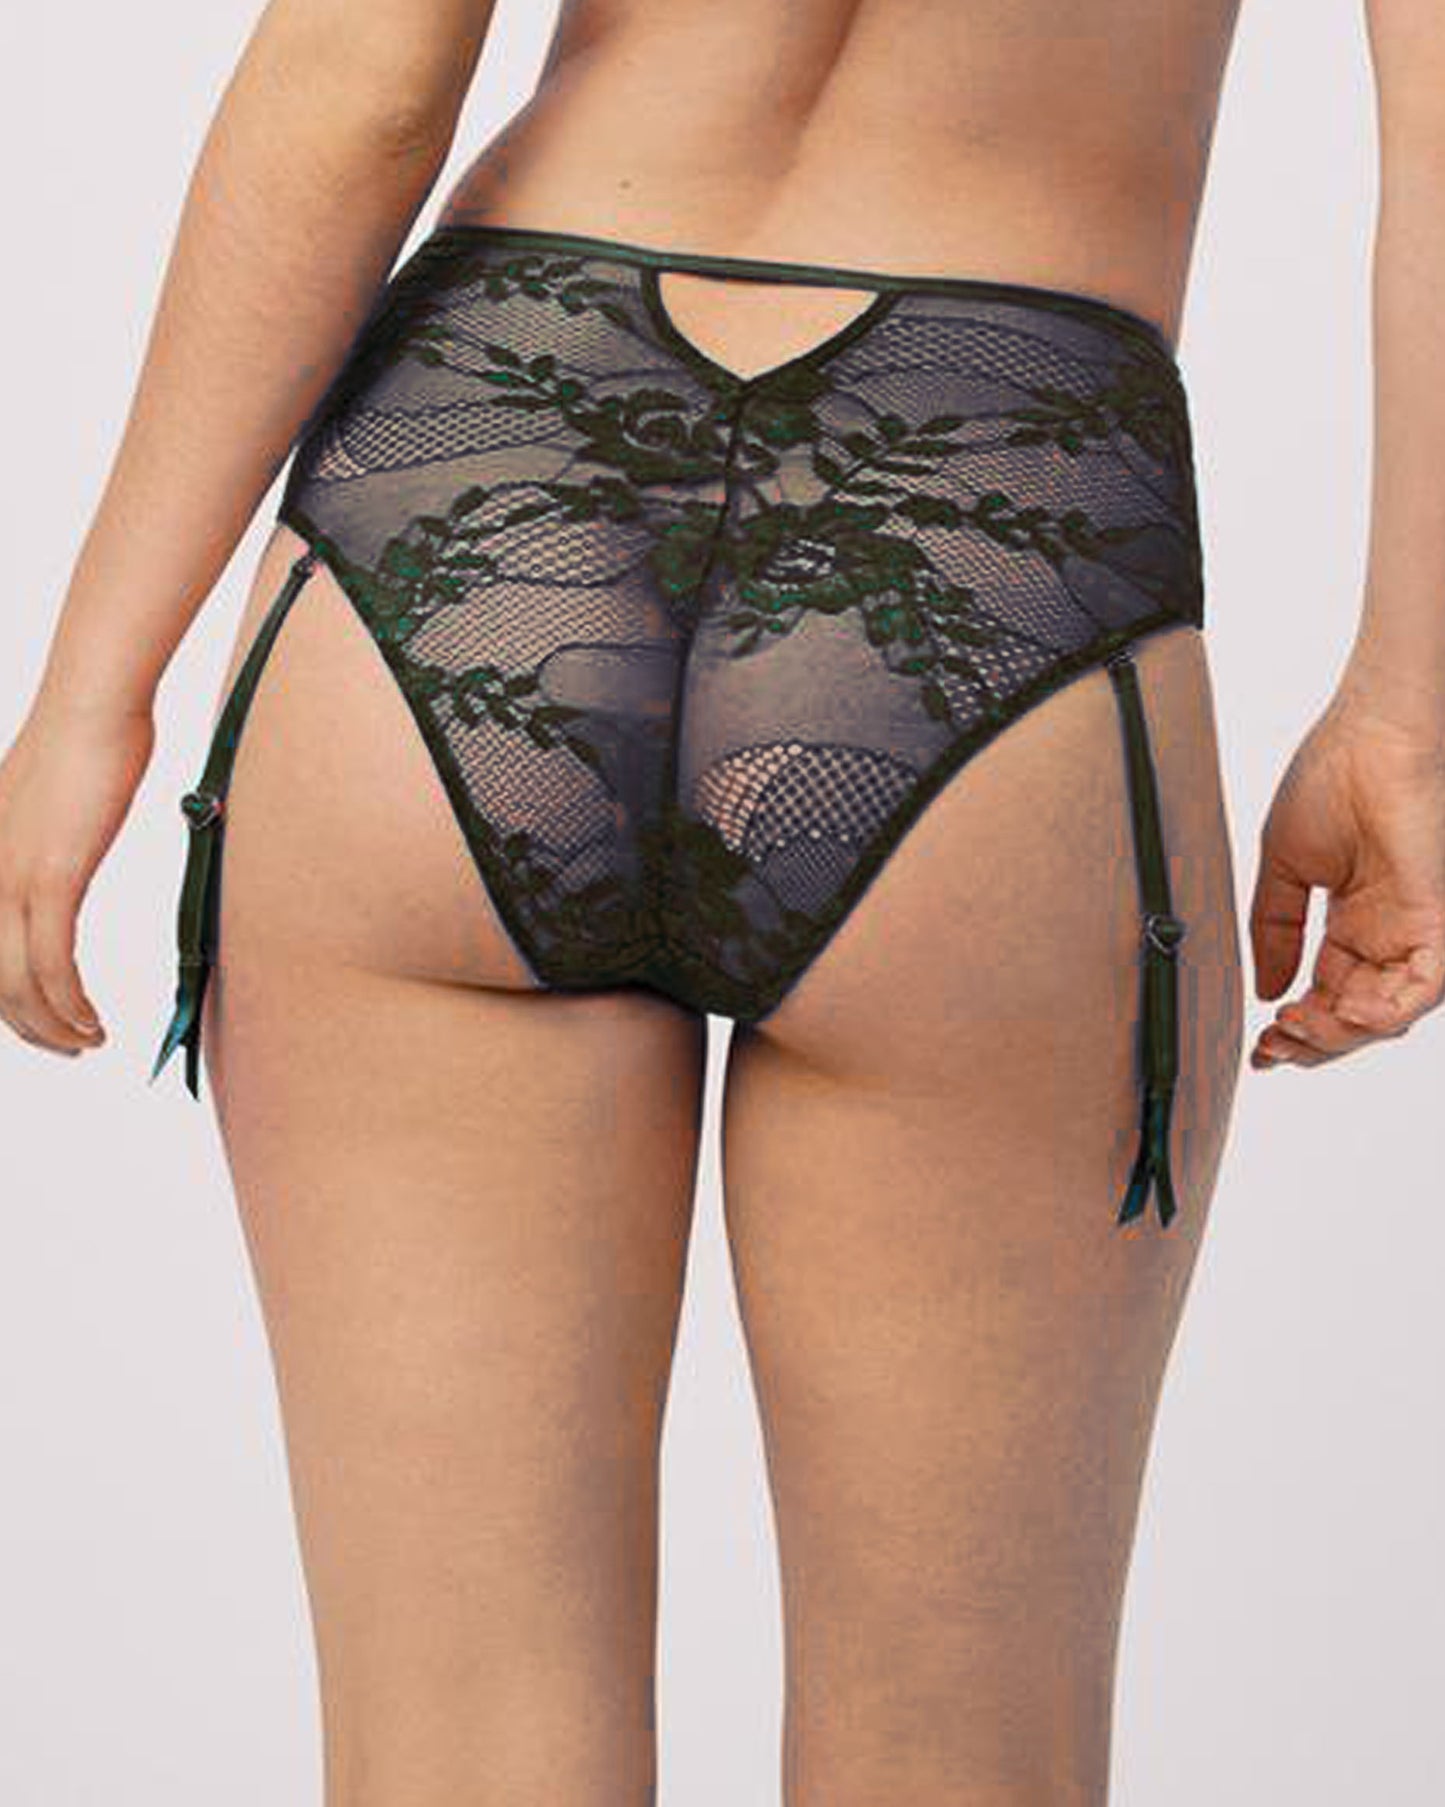 Ysabel Mora 10330 Lace Suspender Brief - Black high-waisted panty briefs with removable suspender straps, floral lace panel on the front and back and tulle side panels.Ysabel Mora 10630 Lace Suspender Brief - Black high-waisted panty briefs with removable suspender straps, floral lace panel on the front and back and tulle side panels.